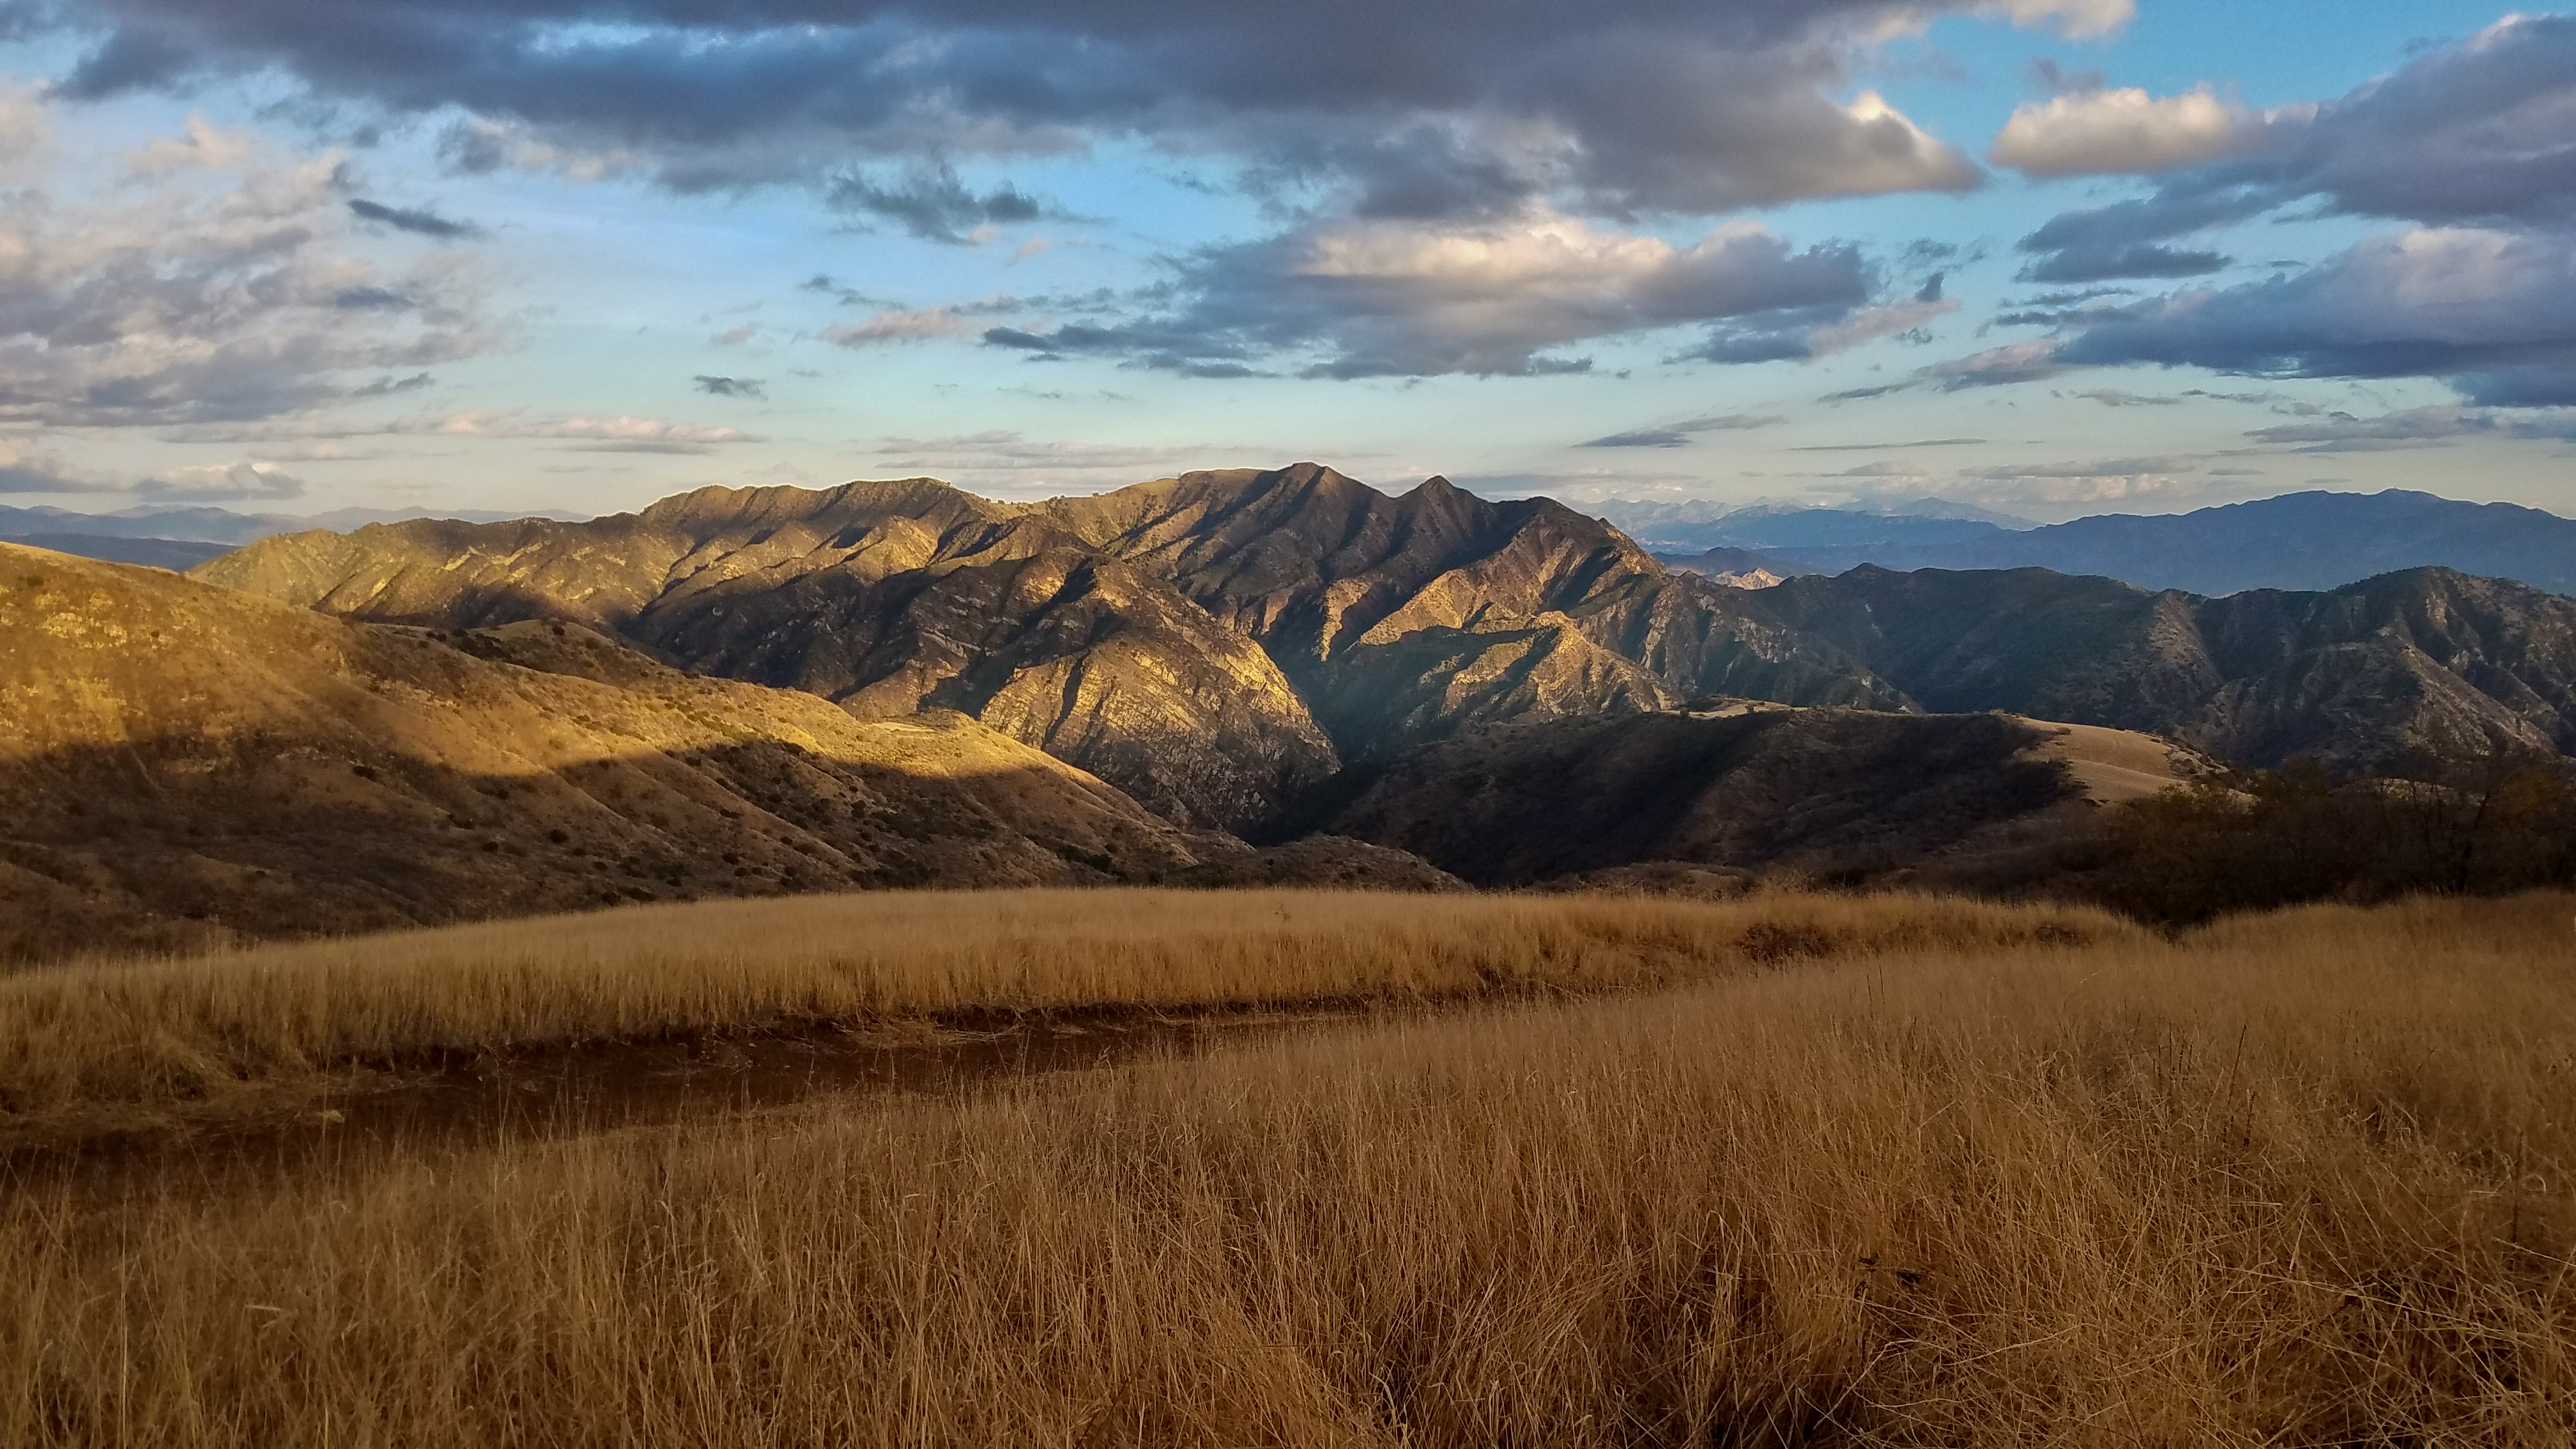 A golden grass rolling field approaches a canyon with rugged ridgelines continuing into the top third of the image which is light gold and clue sky with fluffy white and grey clouds